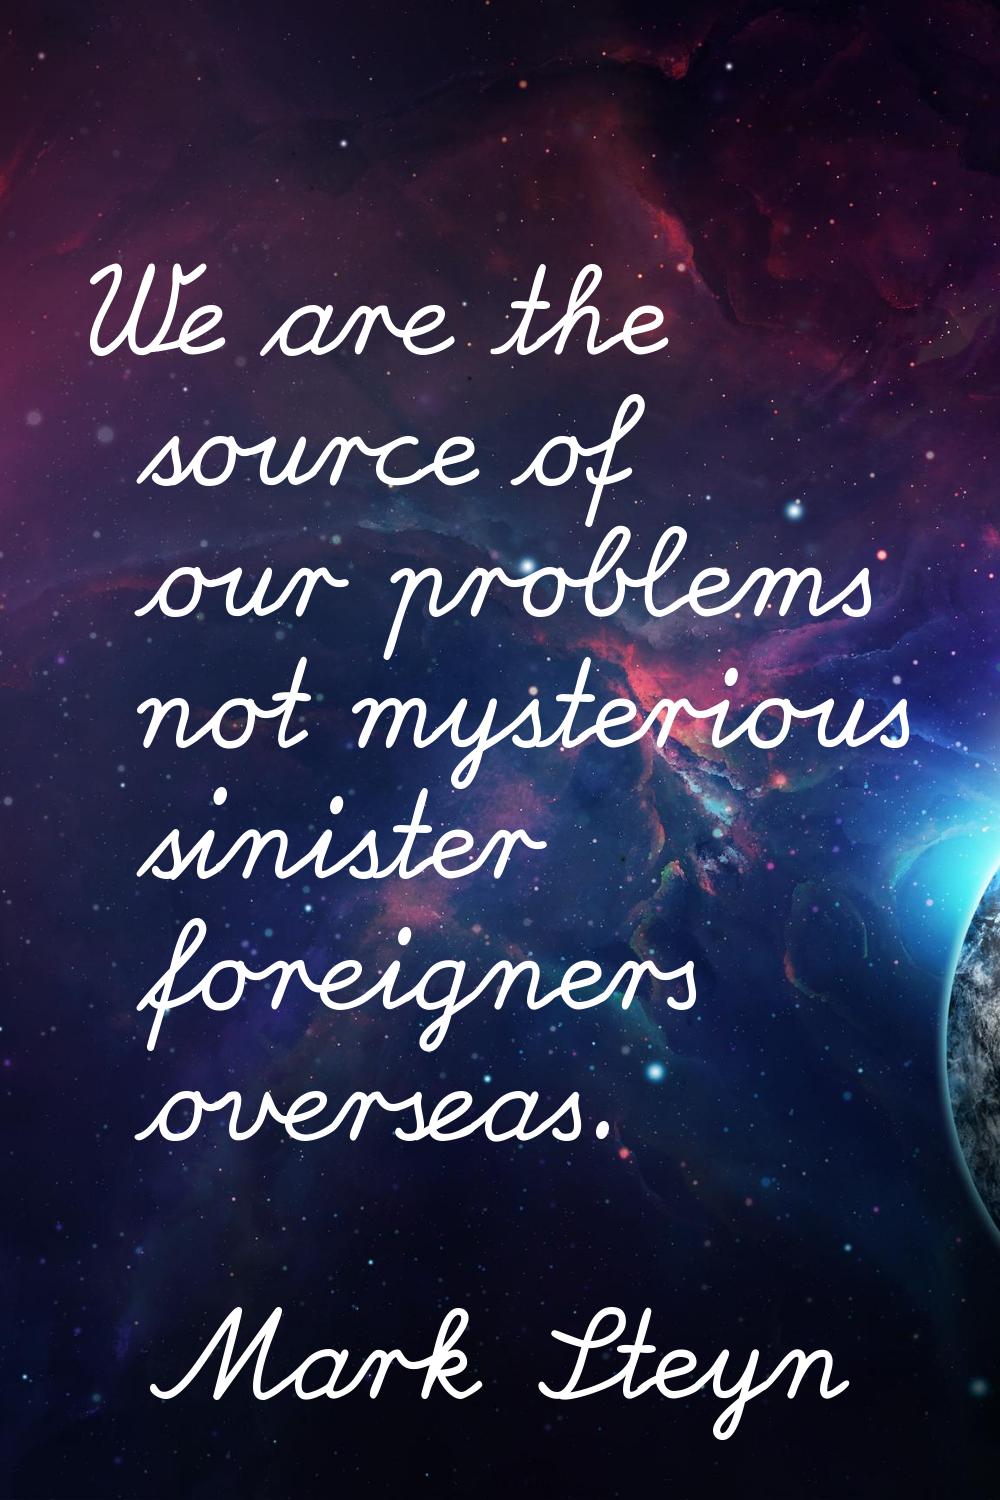 We are the source of our problems not mysterious sinister foreigners overseas.